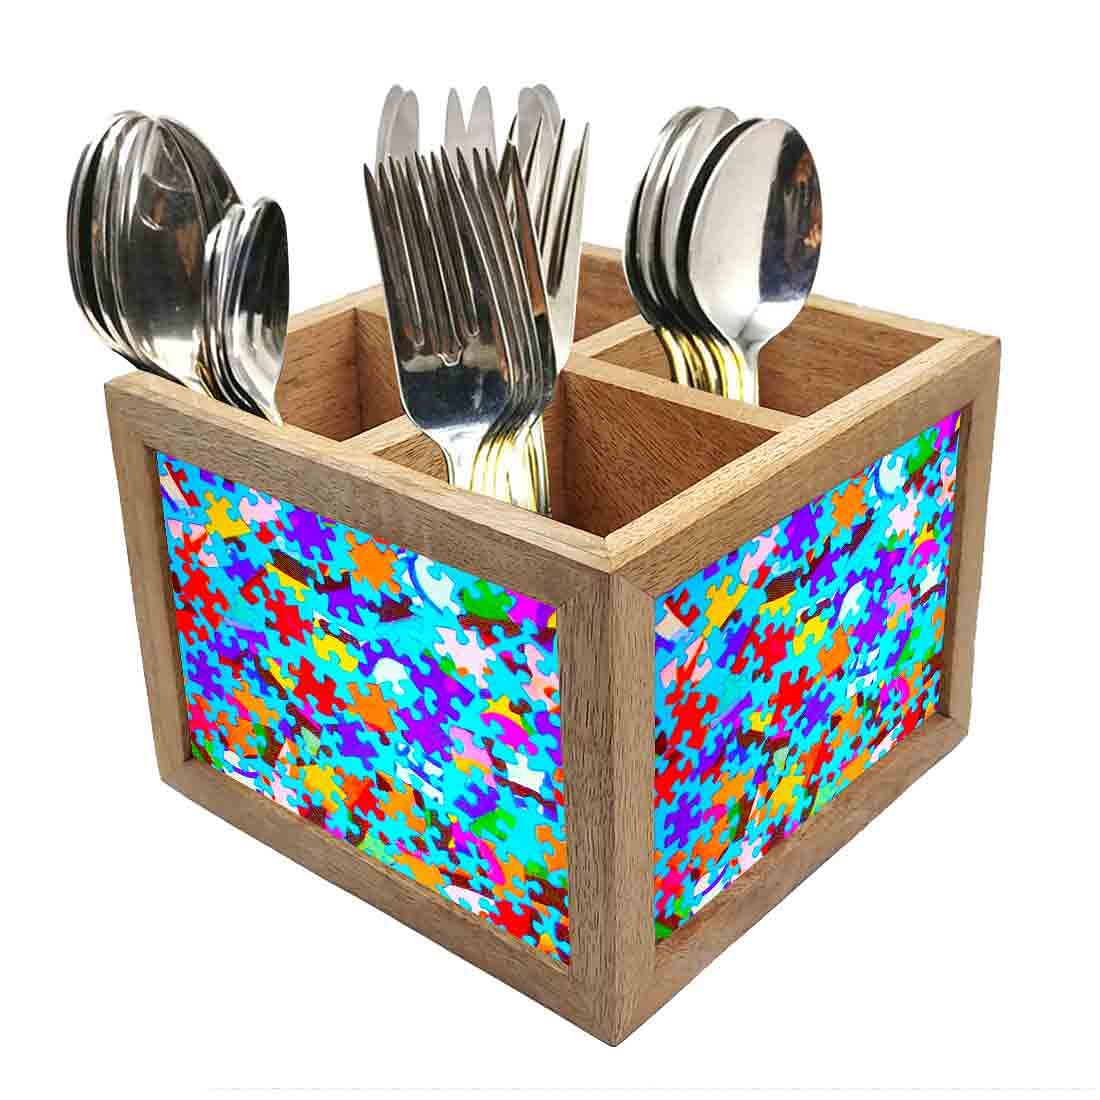 Puzzle Cutlery Holder Stand Silverware Caddy Organizer for Spoons, Forks & Knives-Made of Pinewood Nutcase